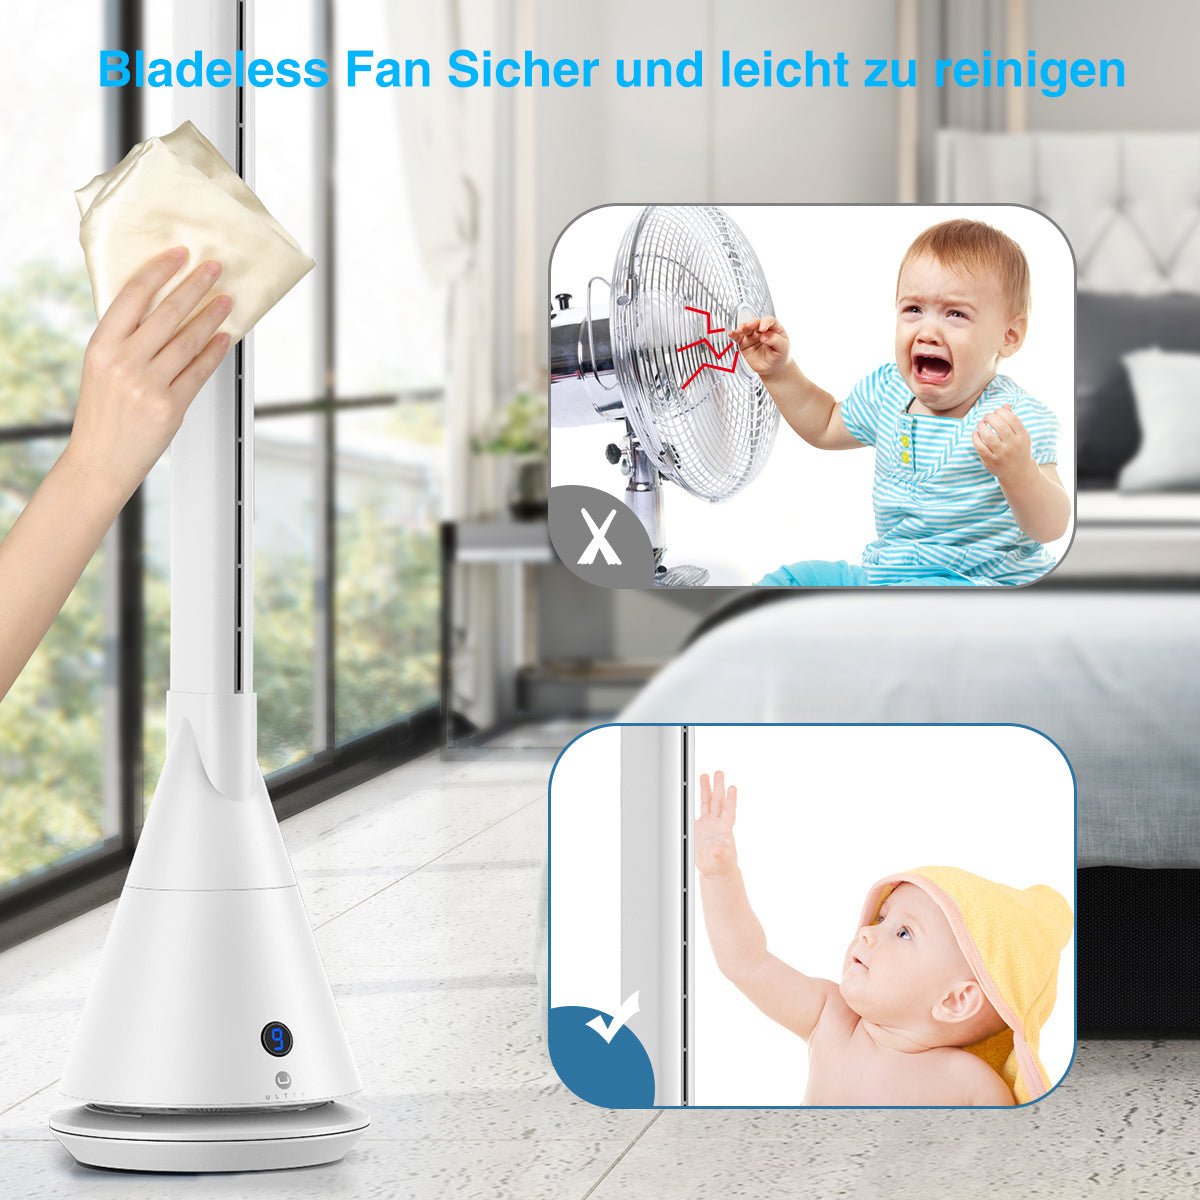 Bladeless Fan with Remote Control CR012,BlacK/White